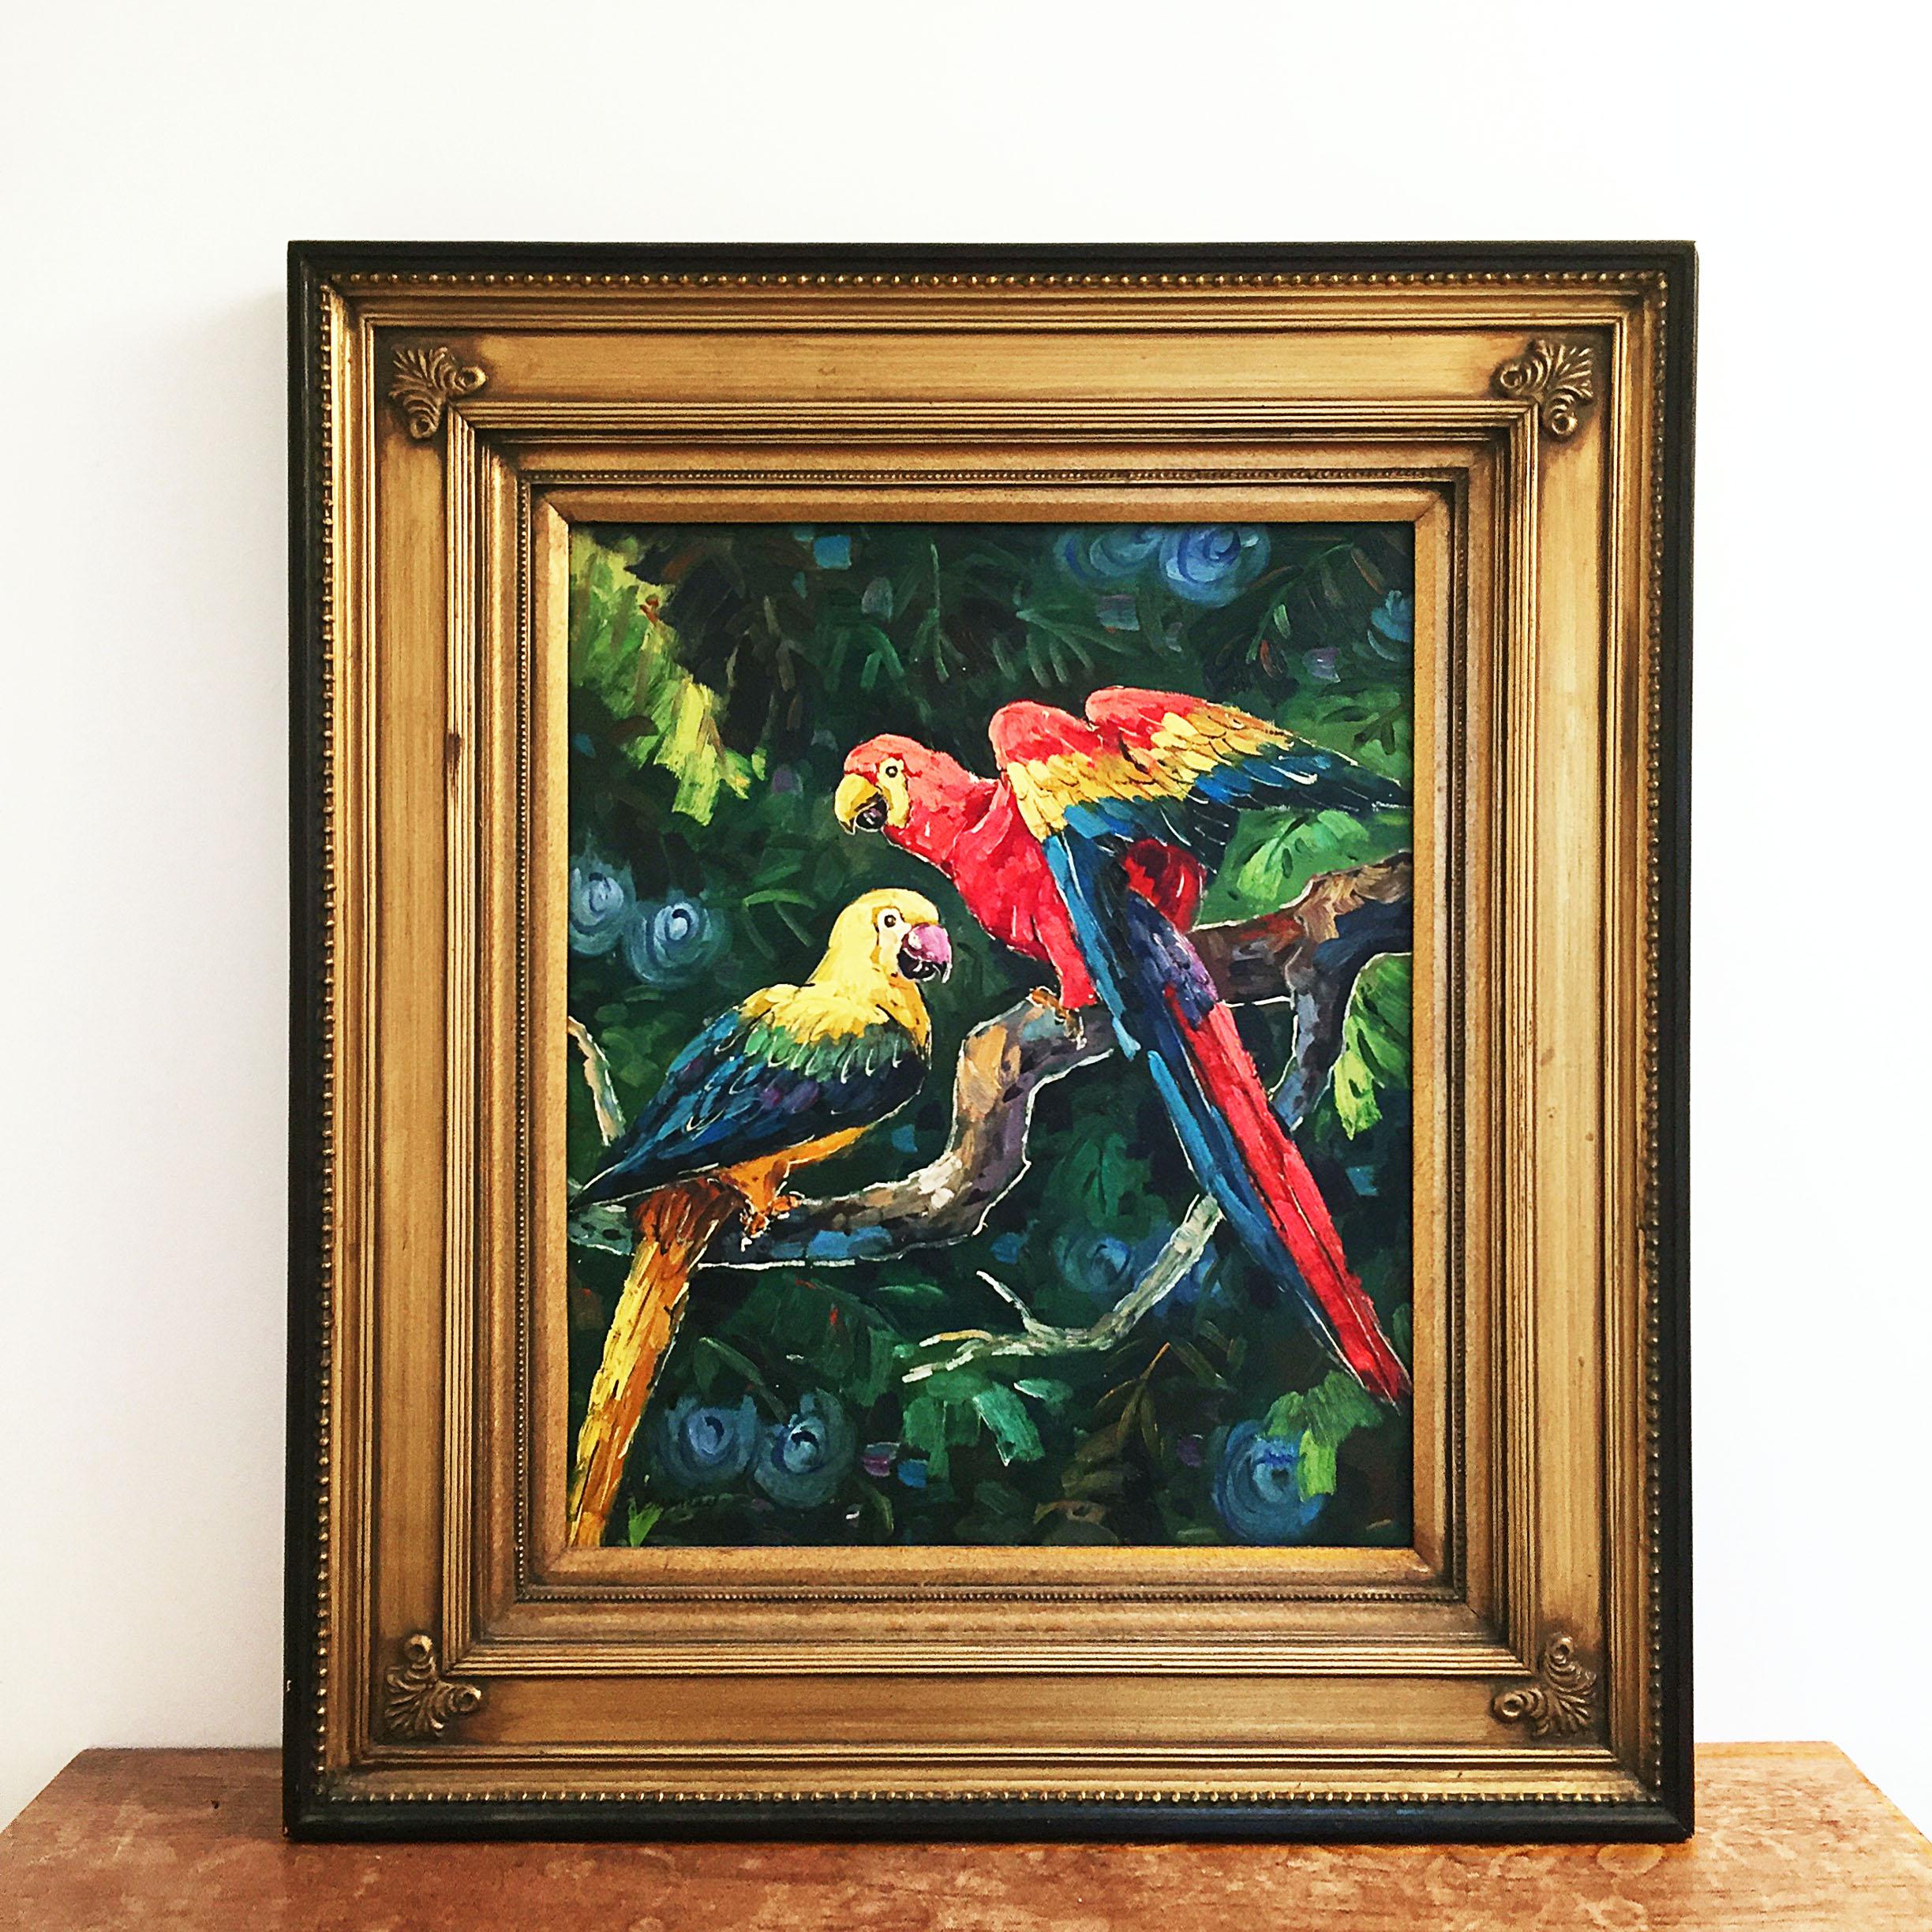 A beautiful oil-on-canvas exotic painting representing two parrots in a jungle. Vibrant colours baldly brushed and framed in a heavy gilded wooden and plaster frame. Made sometime in the 1990s and signed indistinctly.

ARTIST: Indistinctly